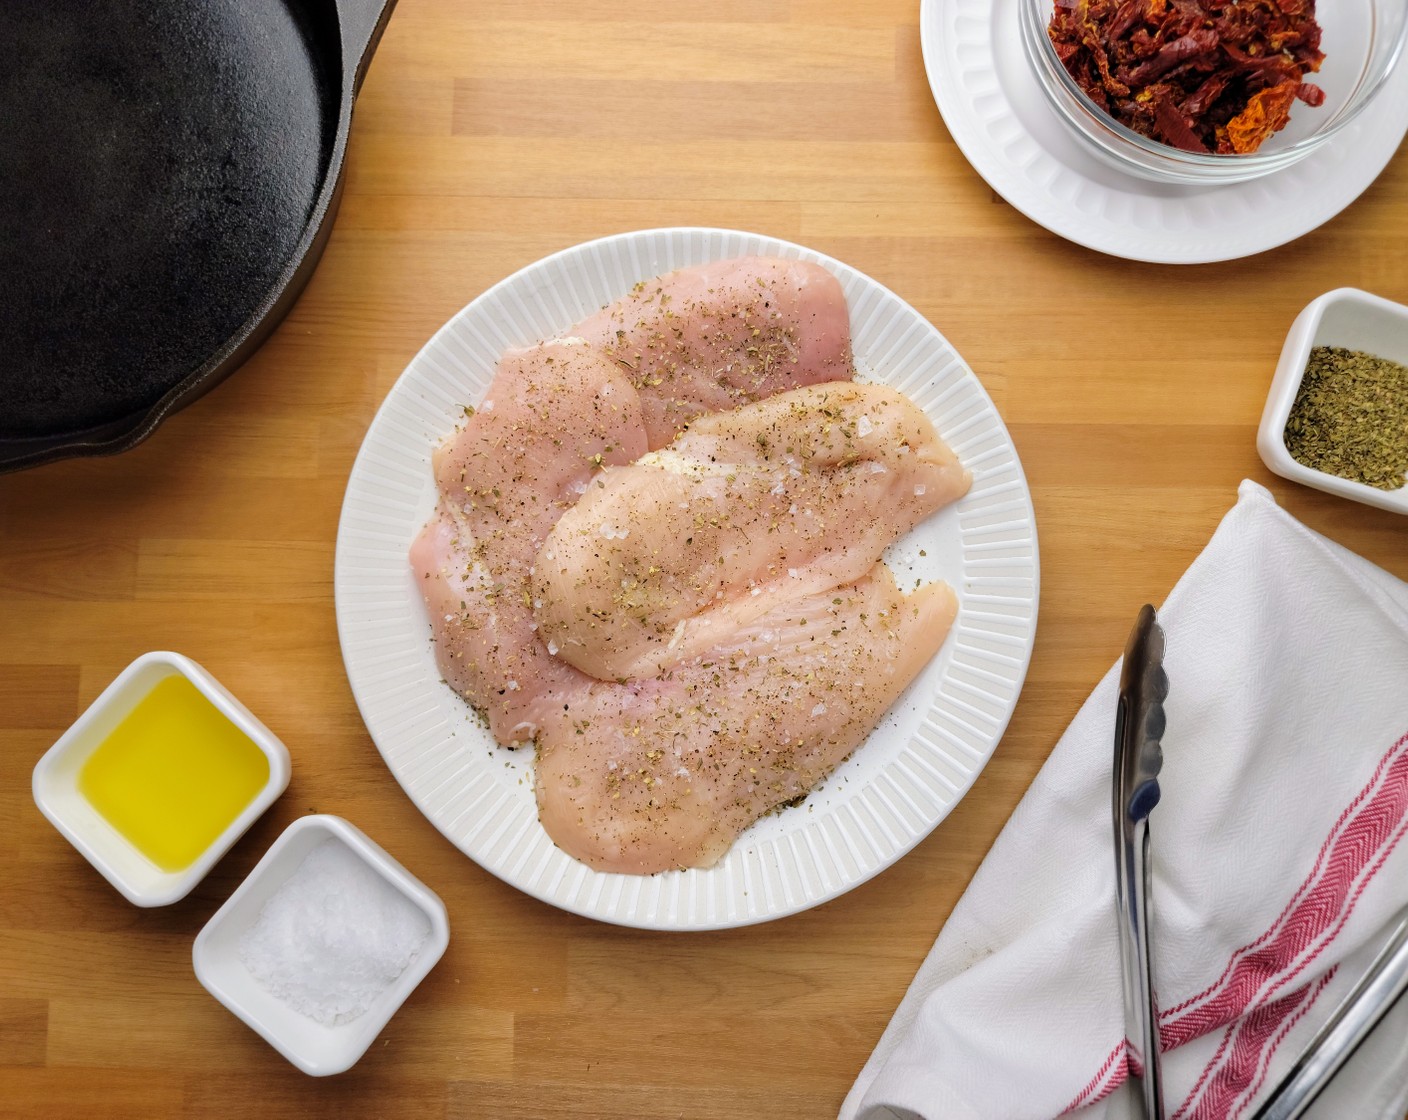 step 4 Bring a pot of salted water to a boil. While the water is heating, pat the chicken breasts dry with paper towels, then season the Boneless, Skinless Chicken Breasts (1.5 lb) all over with Kosher Salt (1/2 Tbsp), Ground Black Pepper (1 tsp), and Italian Seasoning (1 Tbsp).